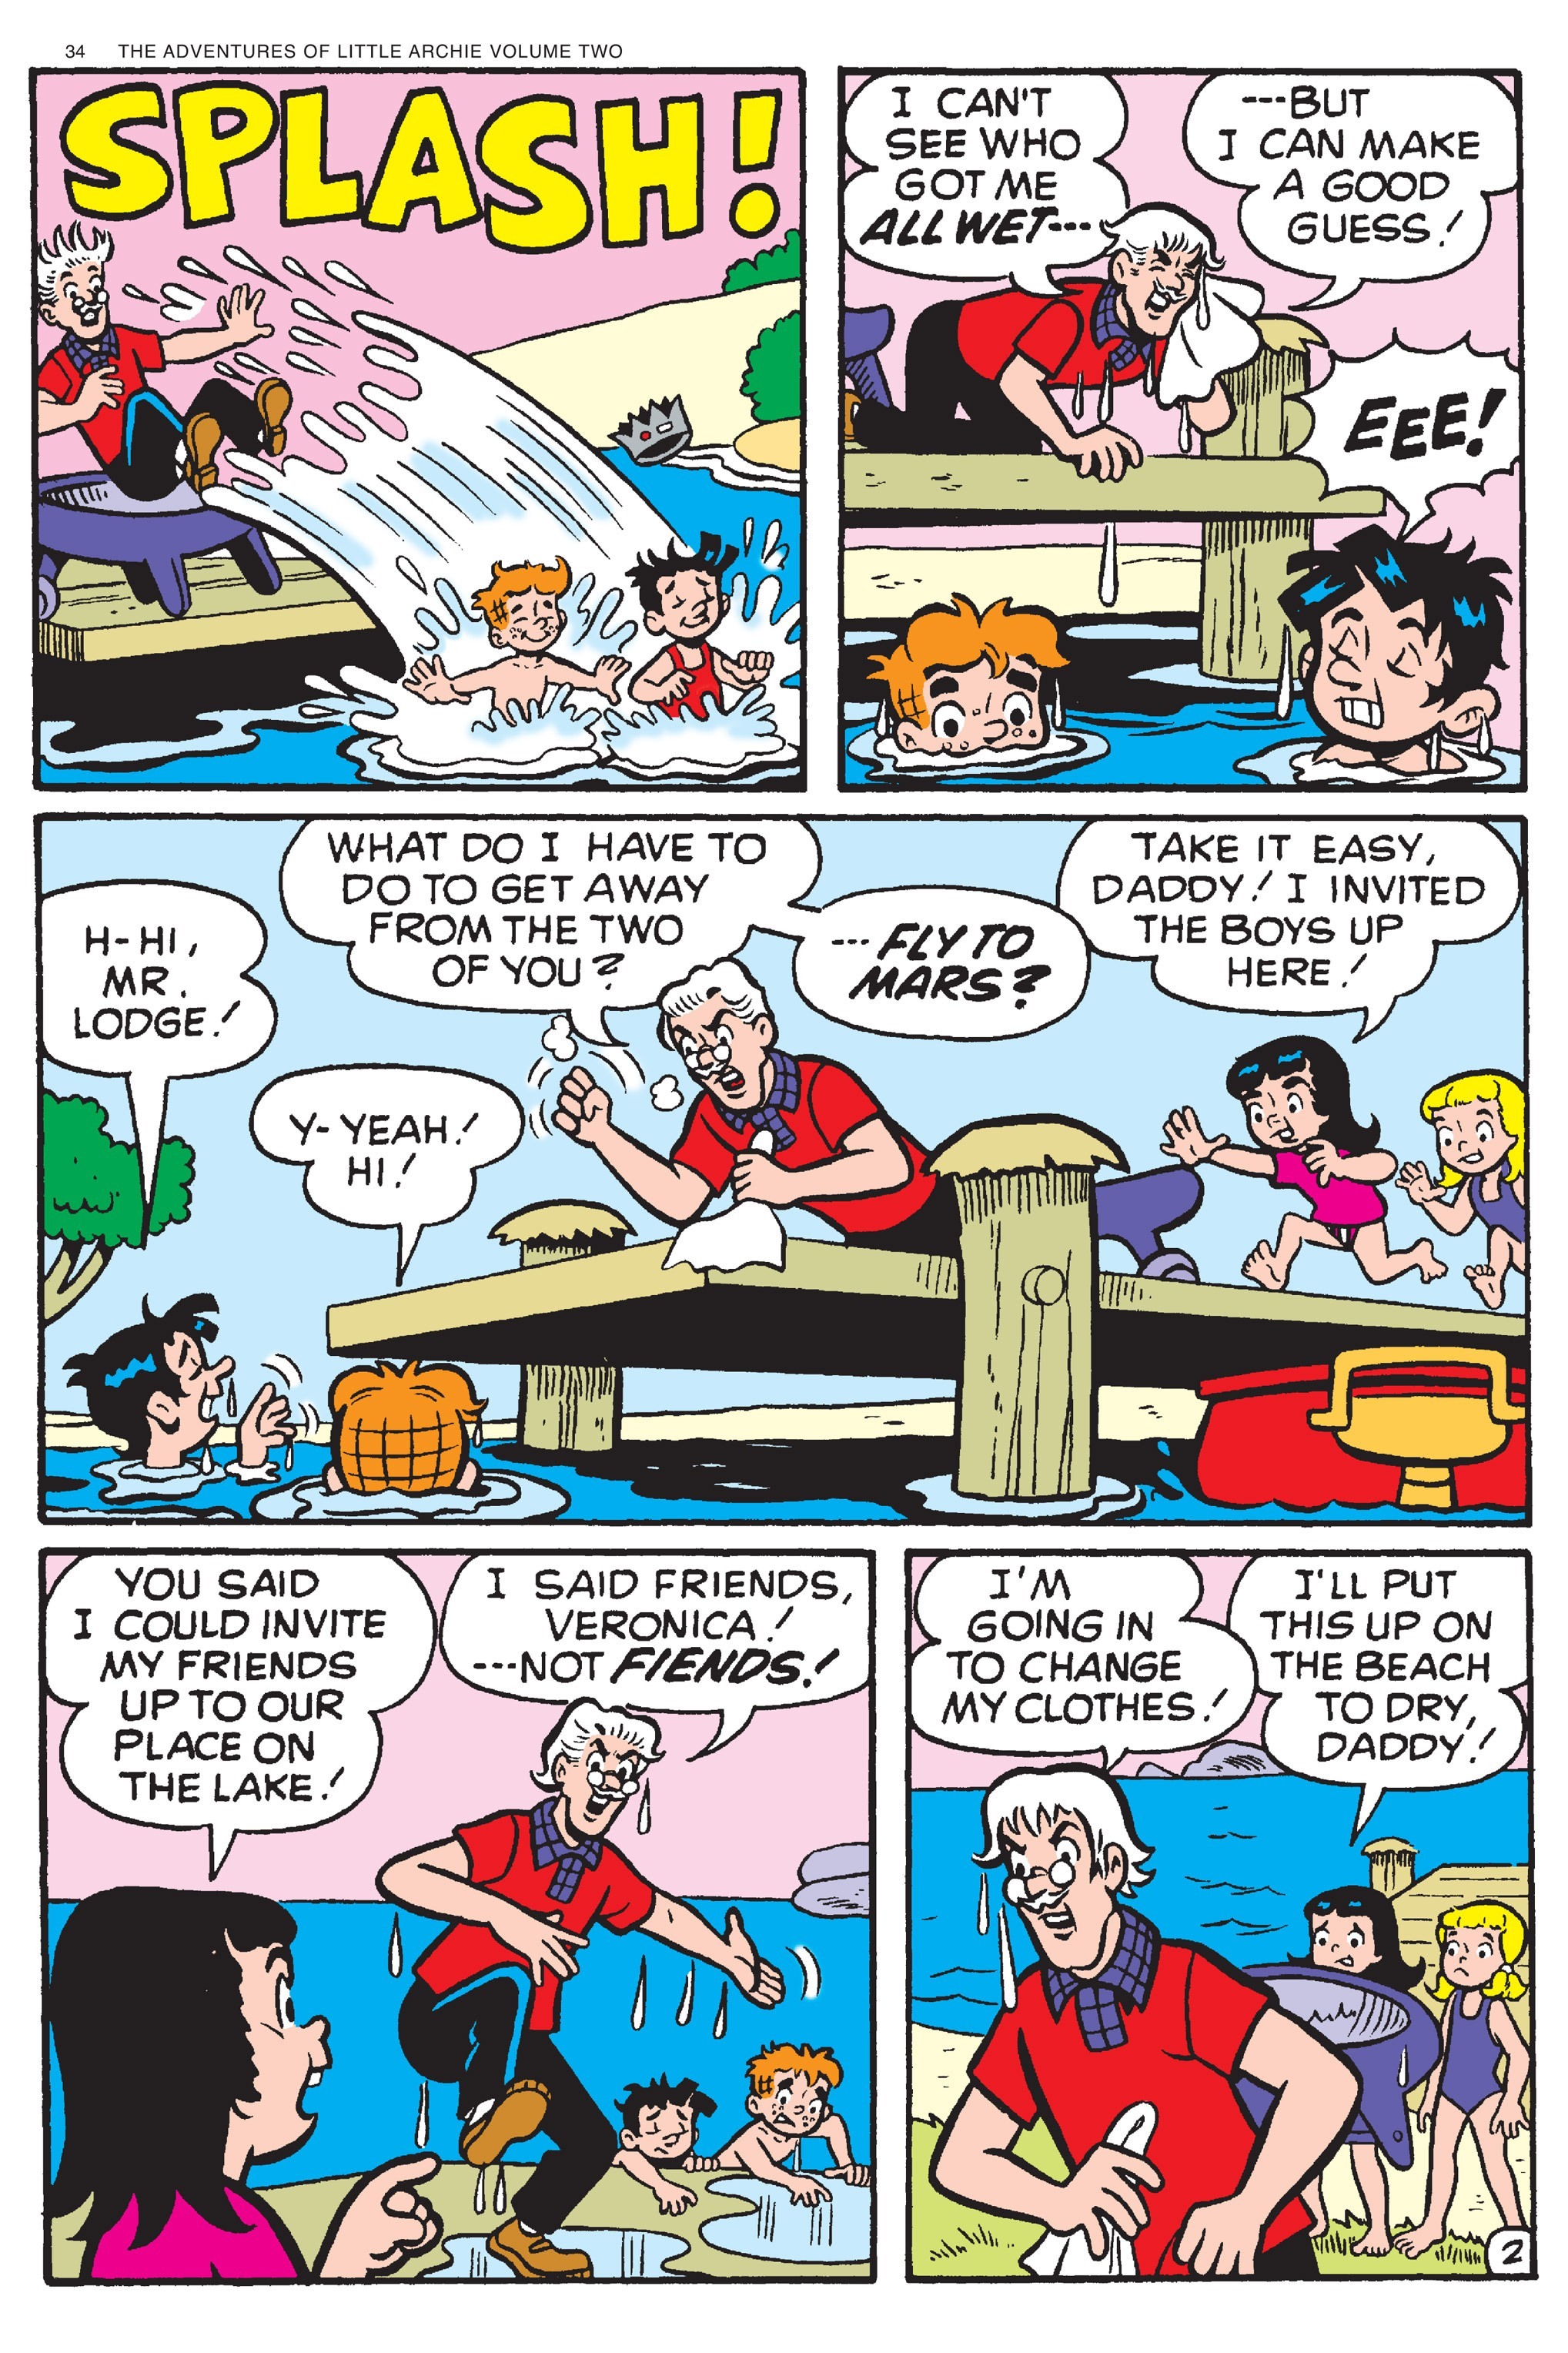 Read online Adventures of Little Archie comic -  Issue # TPB 2 - 35